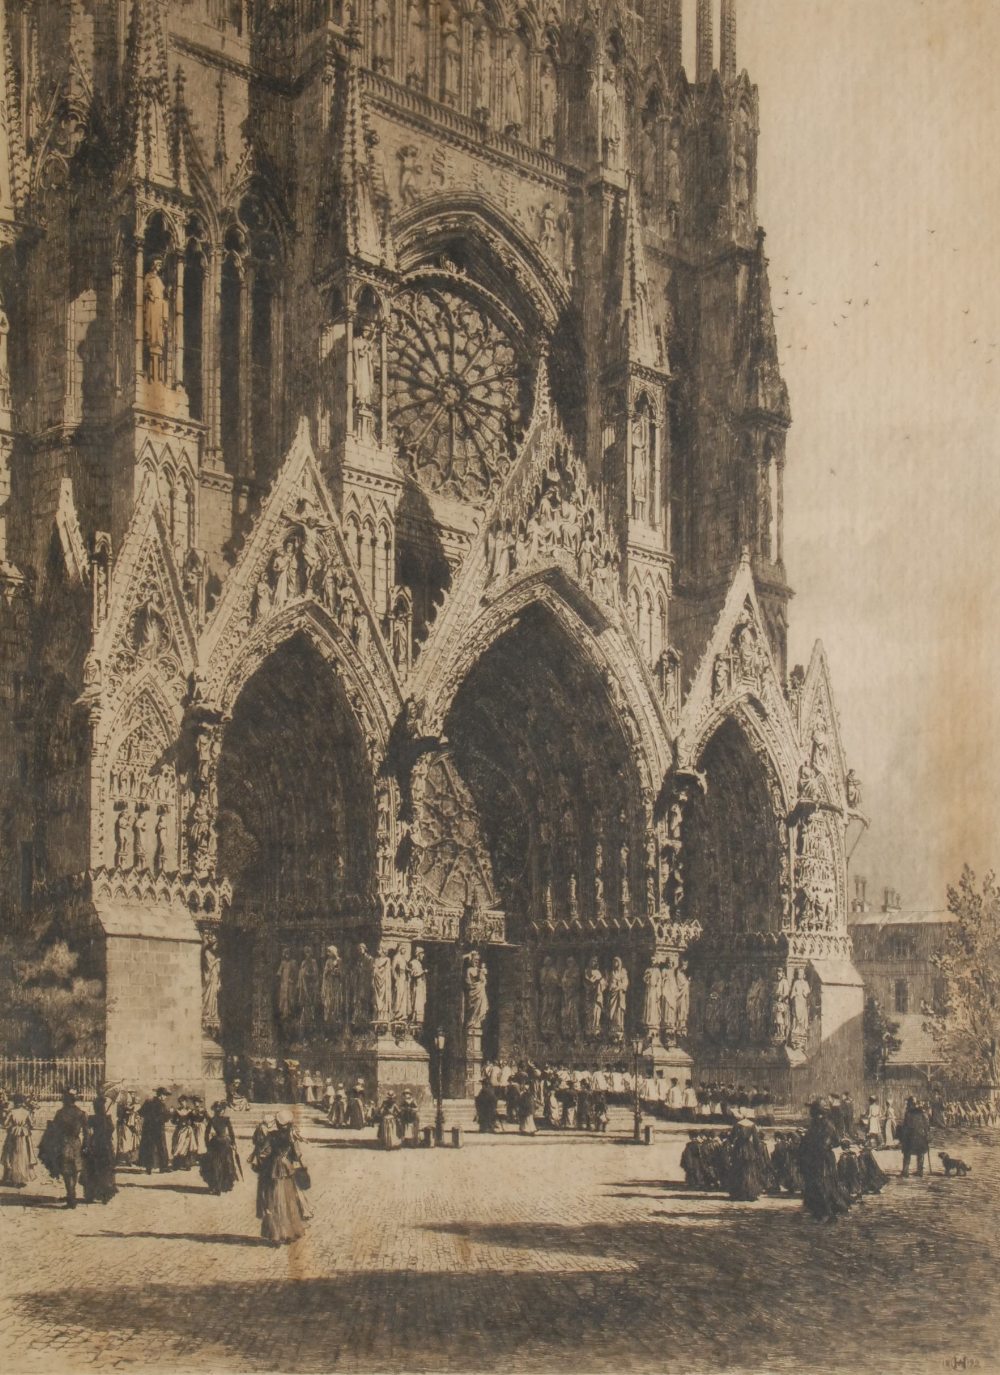 Axel Herman Haig (1835 - 1921), by and after, Rheims Cathedral, monochrome etching, signed in